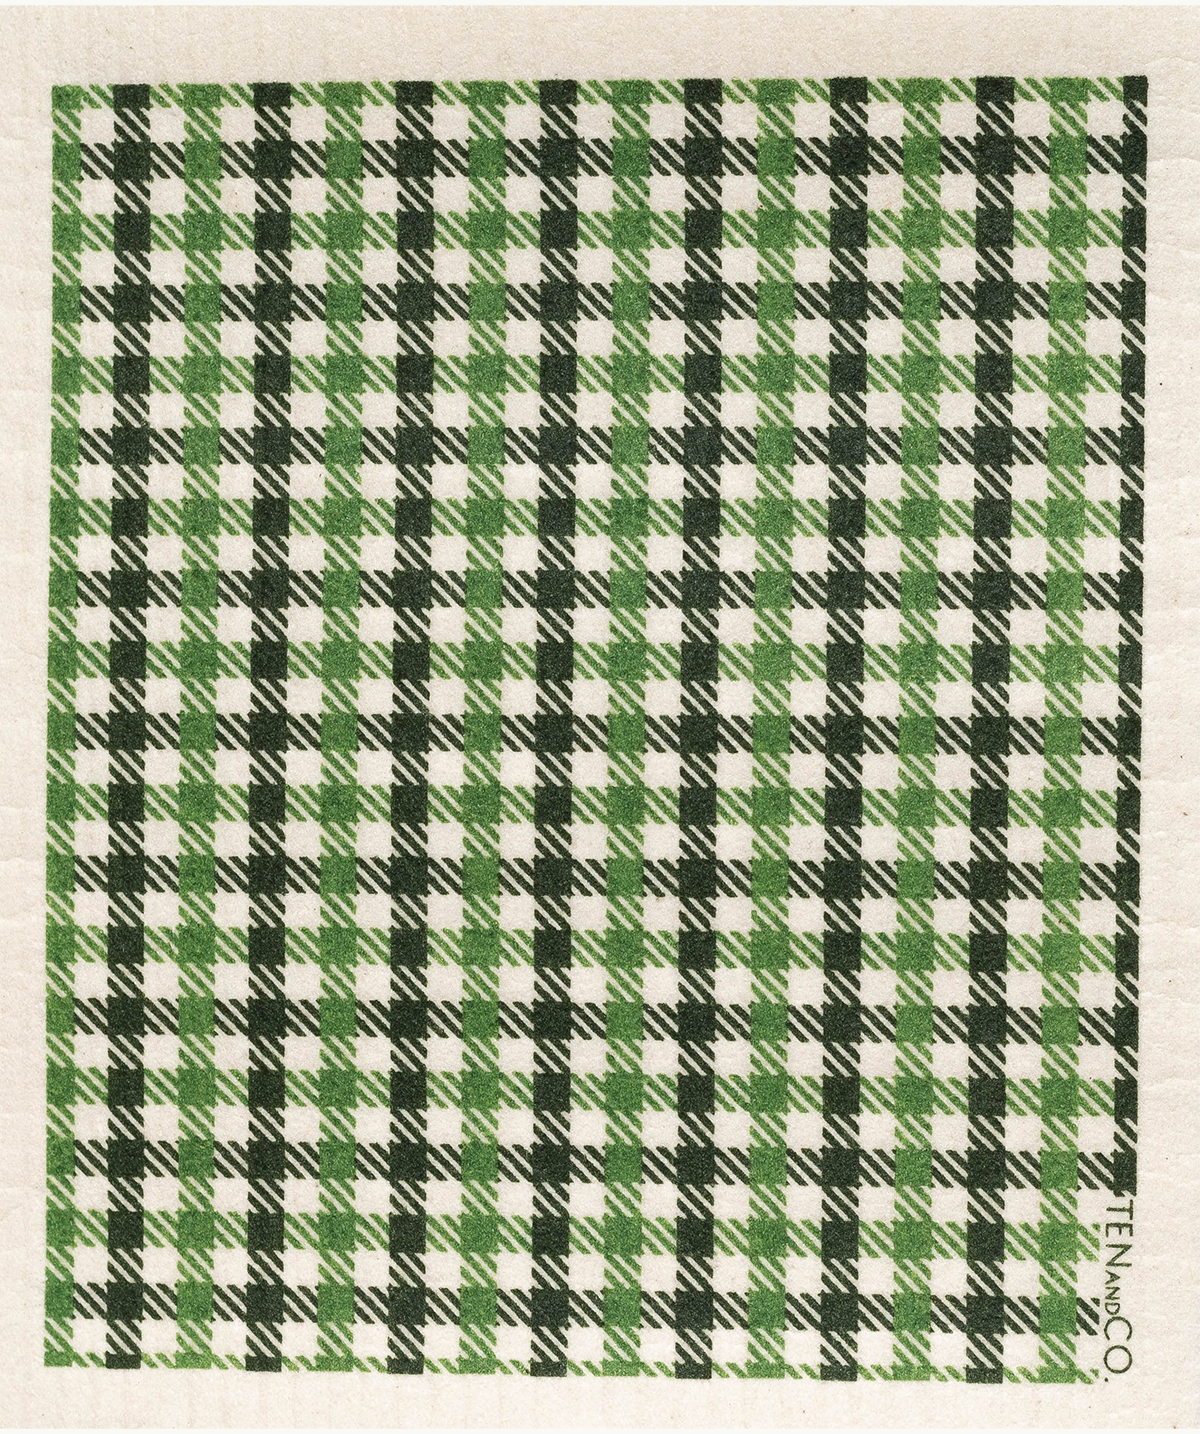 Ten and Co. Plaid Sponge Cloth in Green